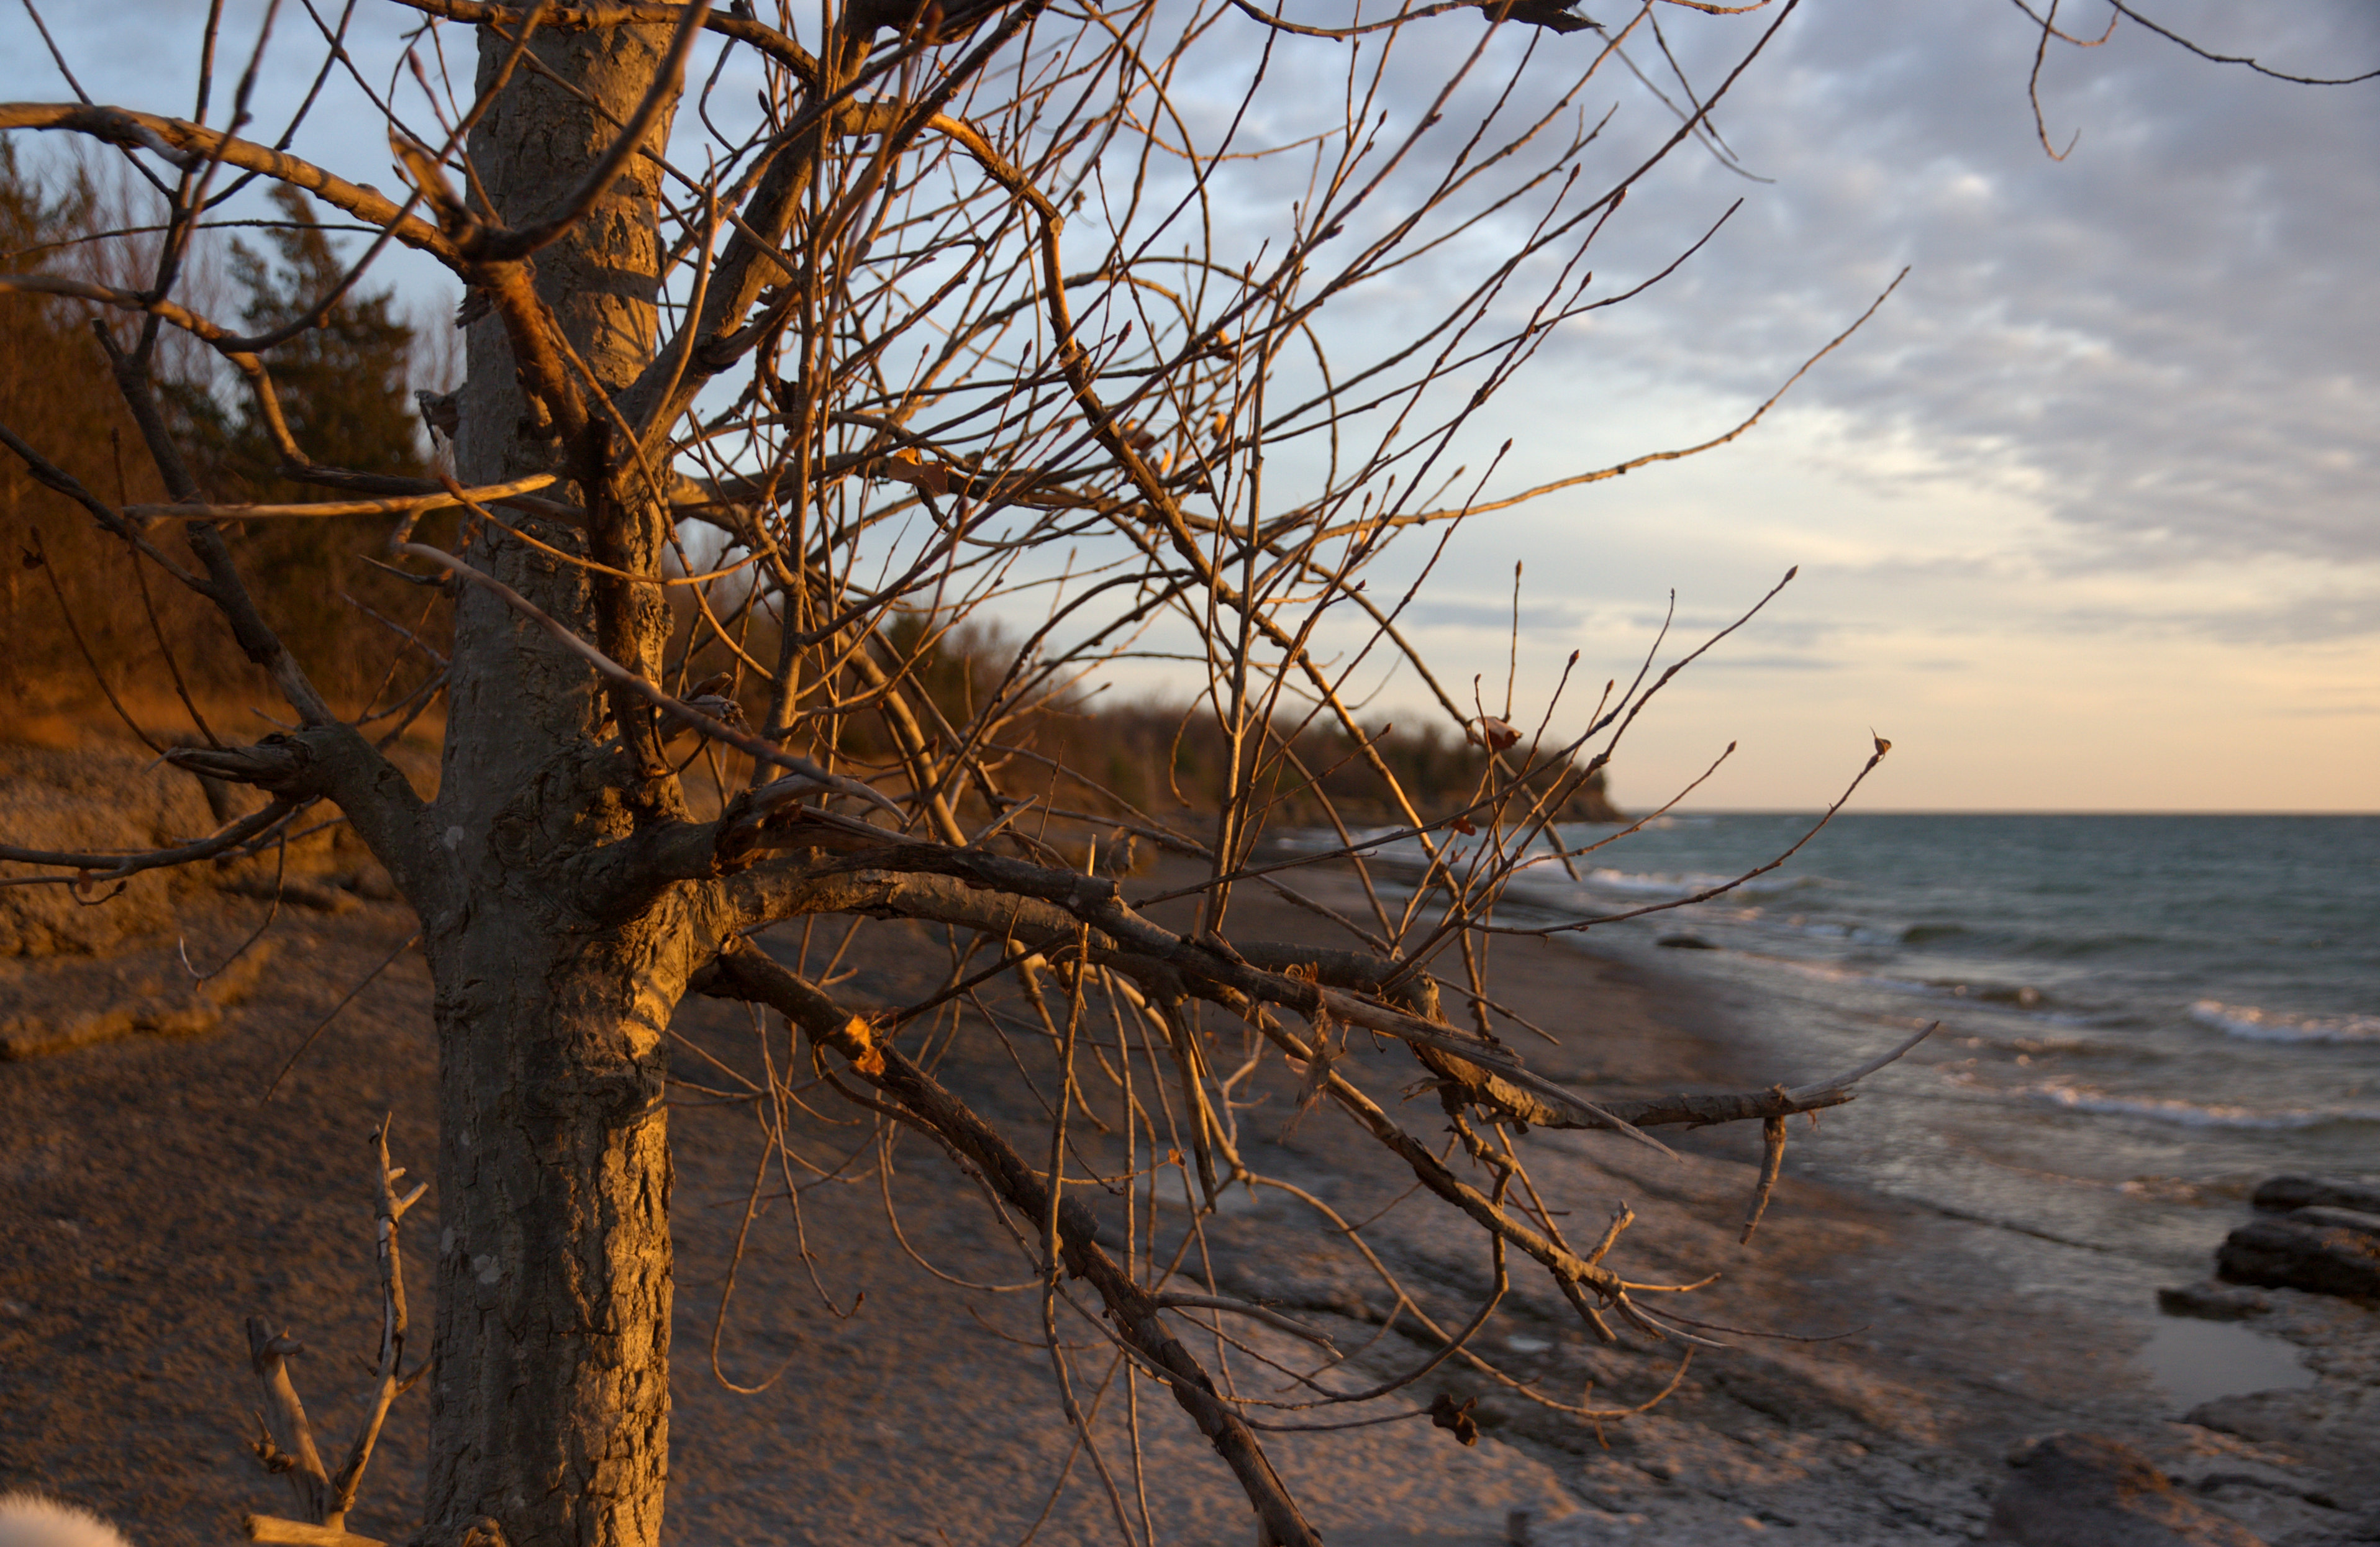 picture: leafless tree in winter, with complex branches; beach in background